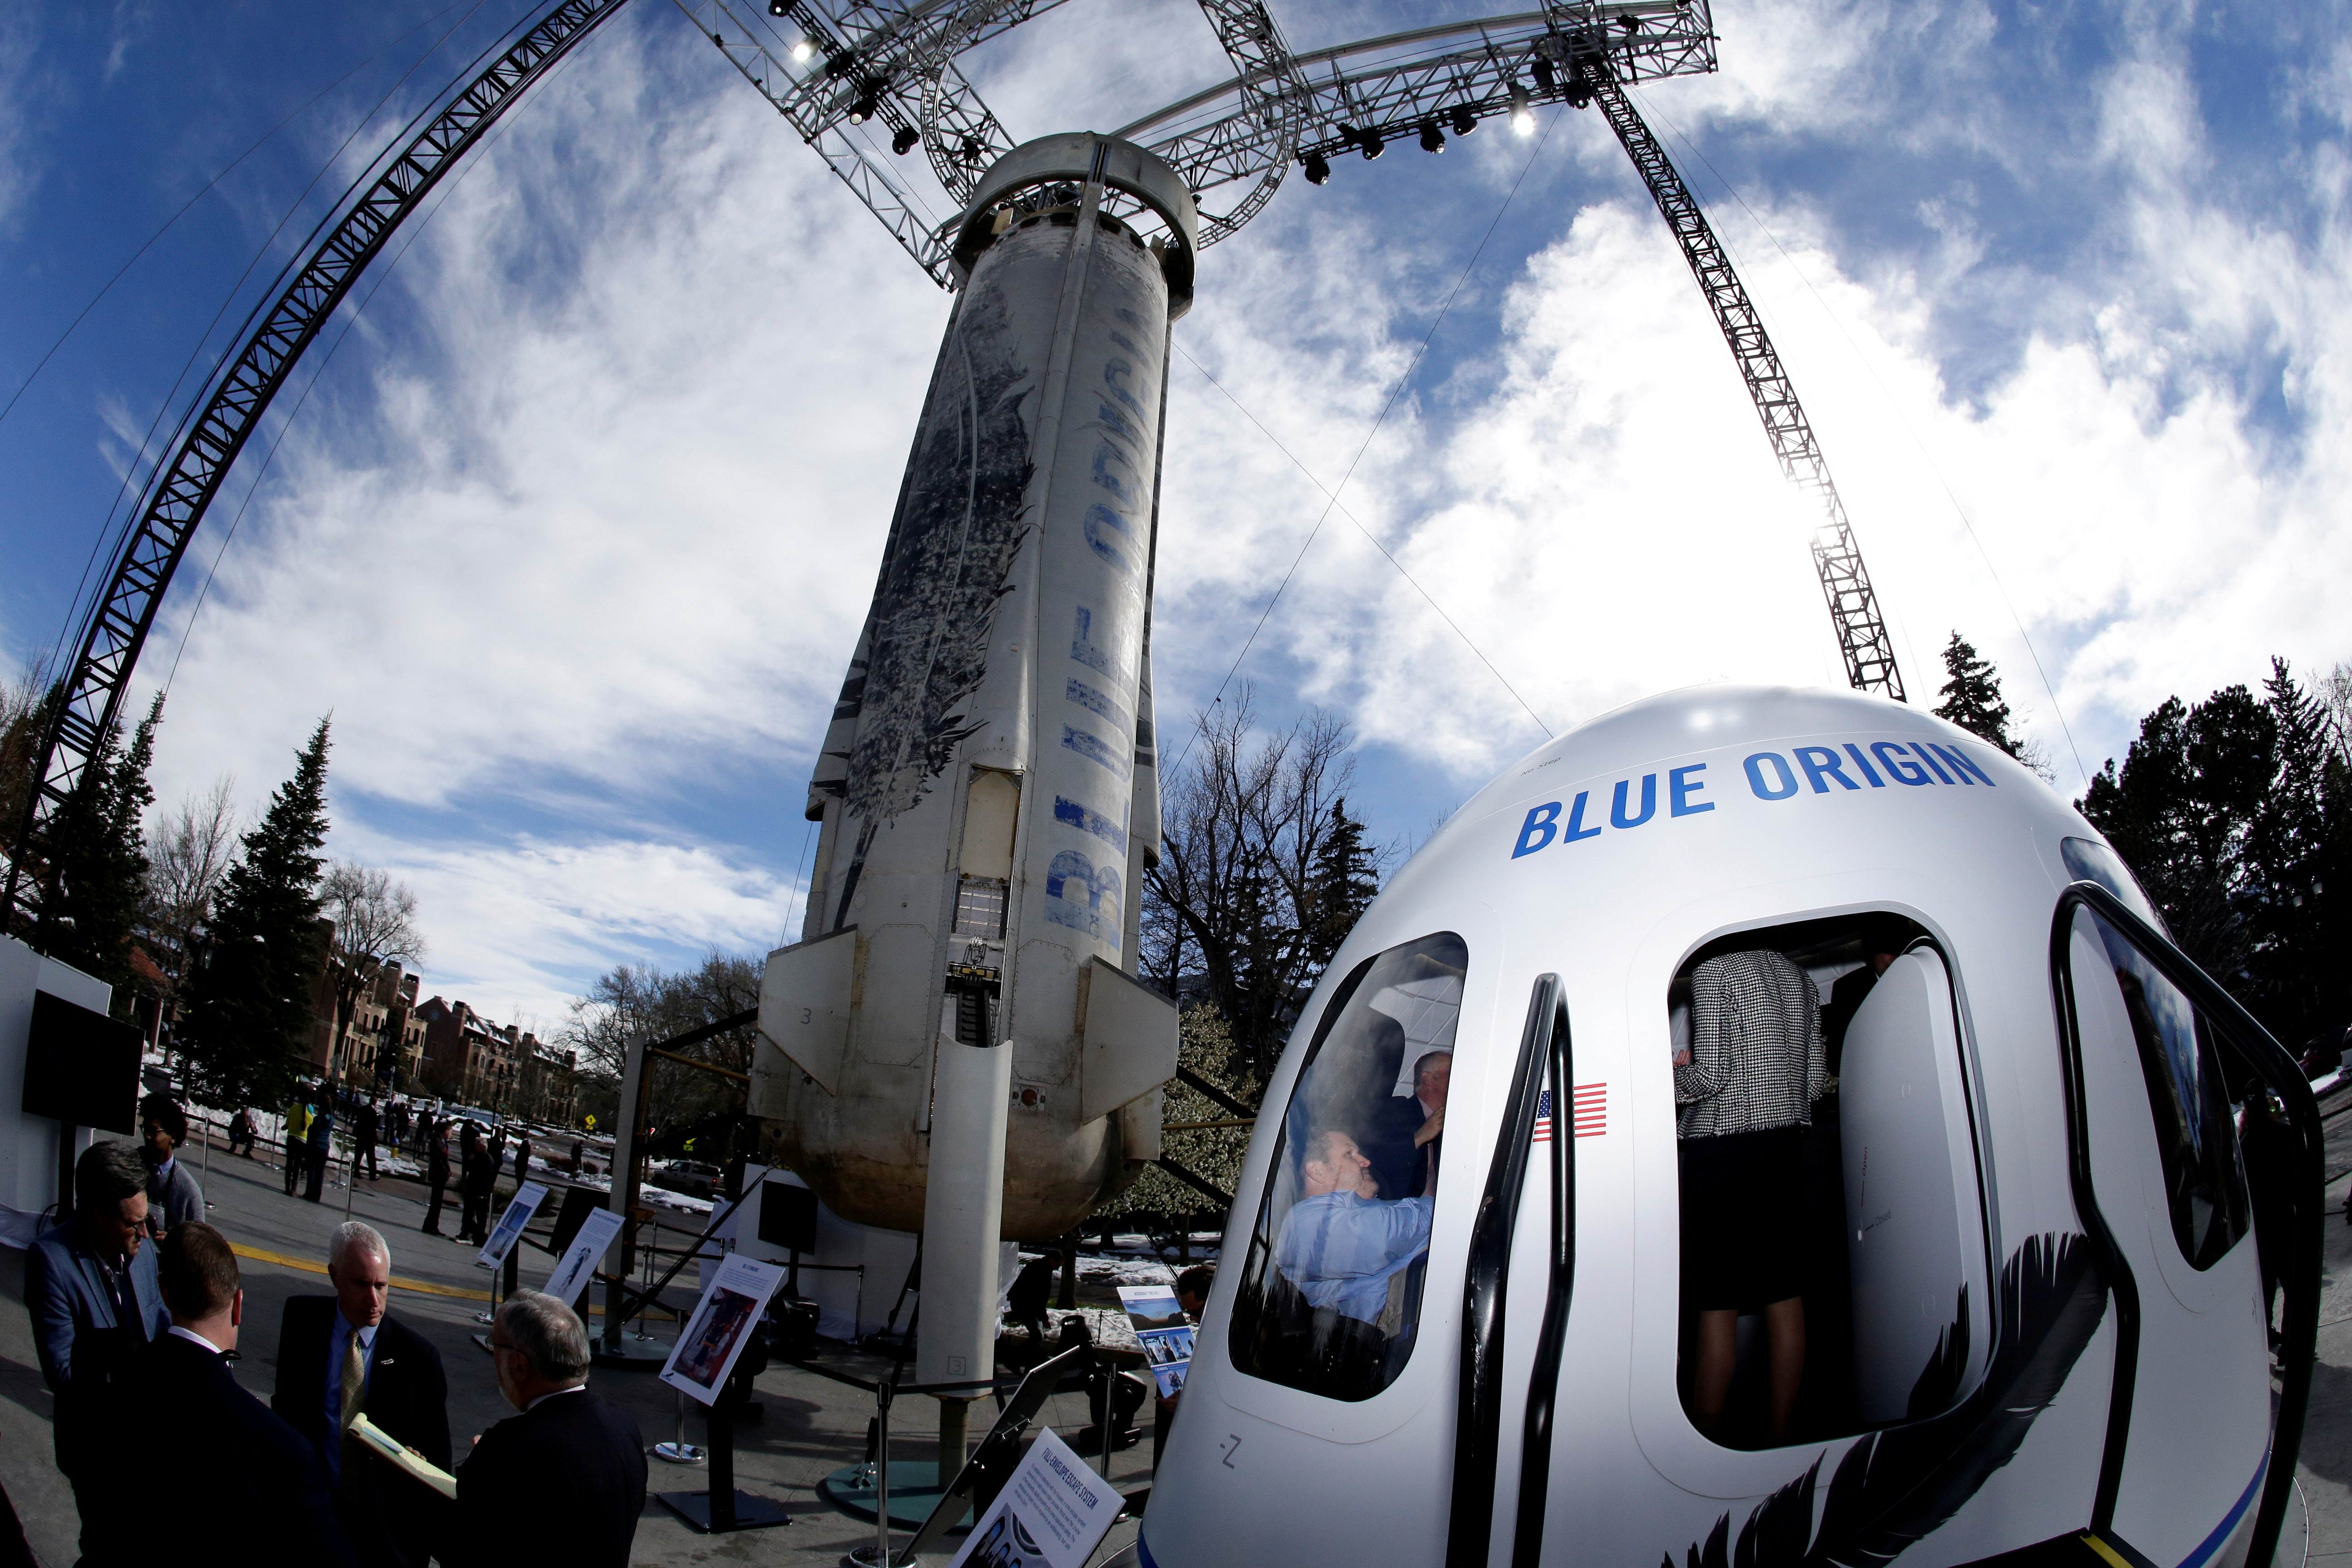 Members of the media tour the Blue Origin Crew Capsule mockup and New Shepard rocket booster at the 33rd Space Symposium in Colorado Springs, Colorado